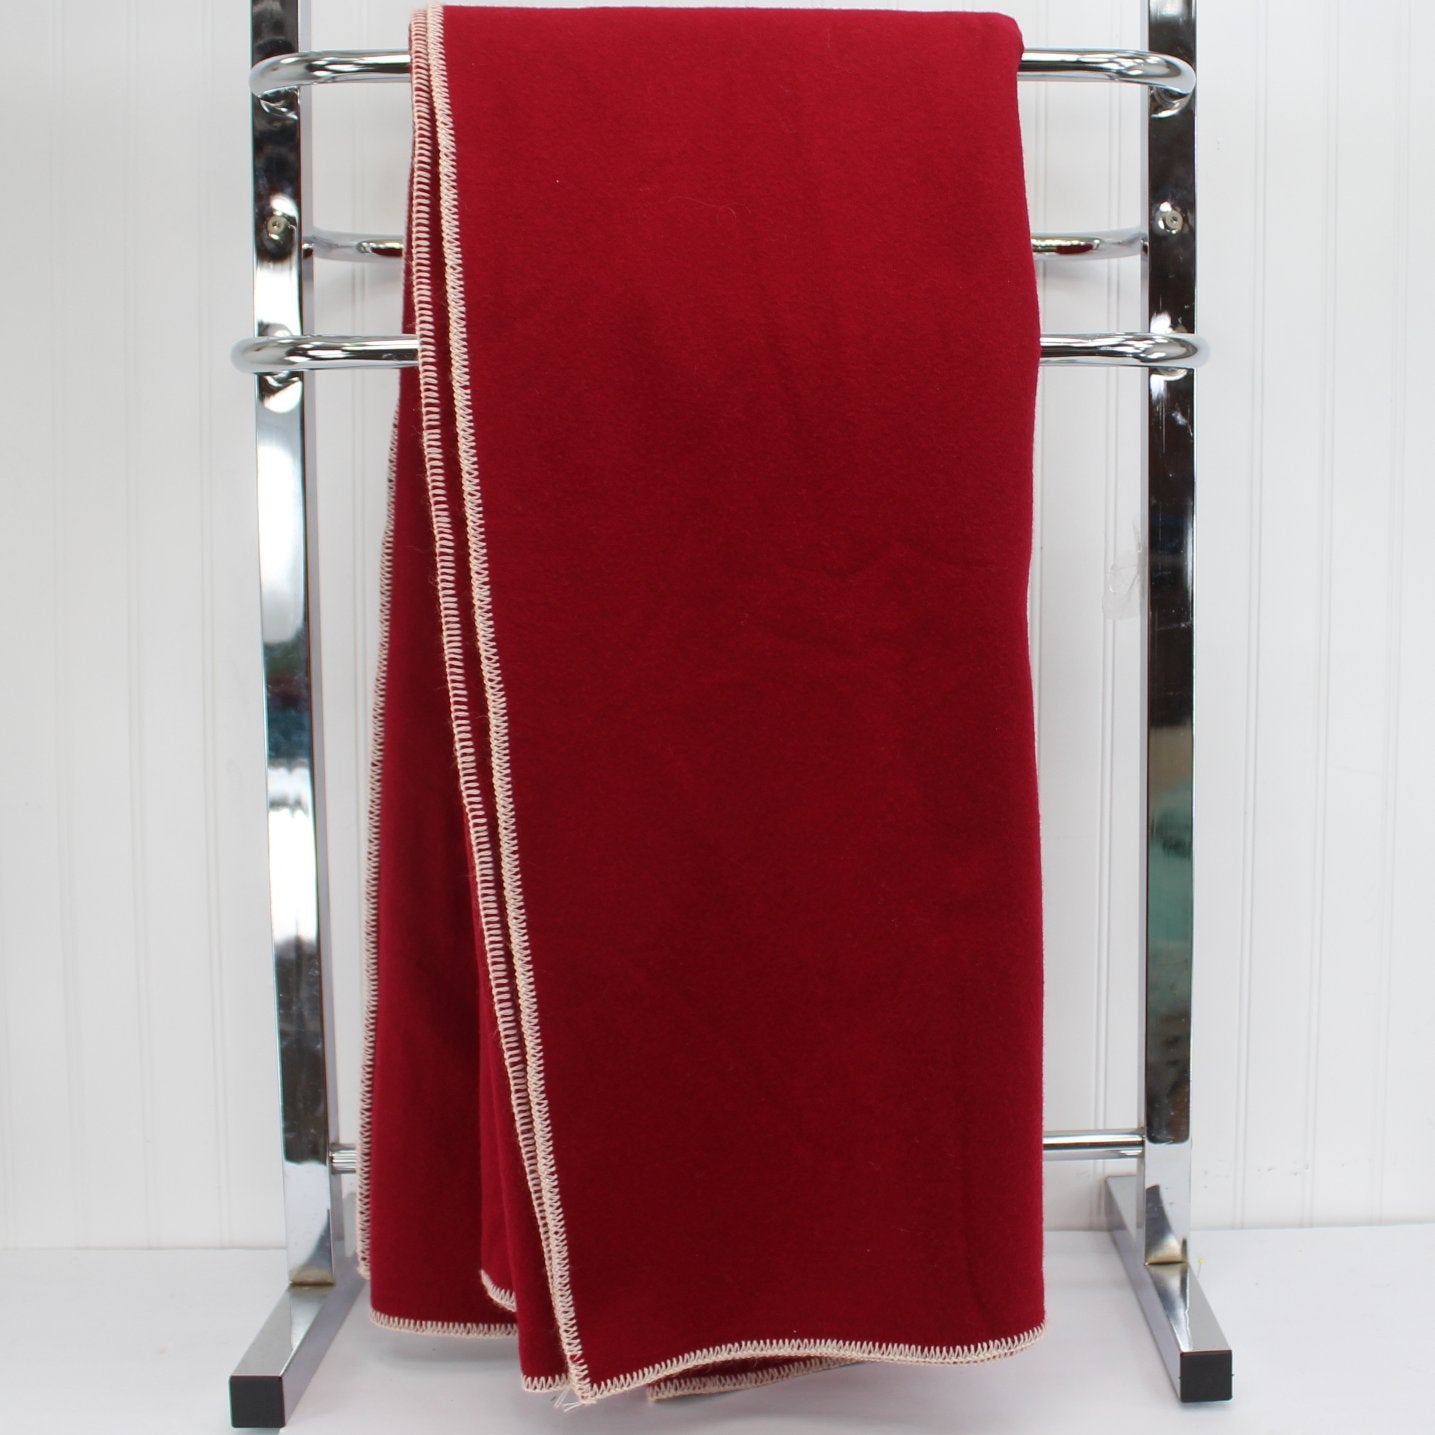 Light Wool Blanket Throw Deep Red White Blanket Stitch Edges All Seasons linear view of blanket